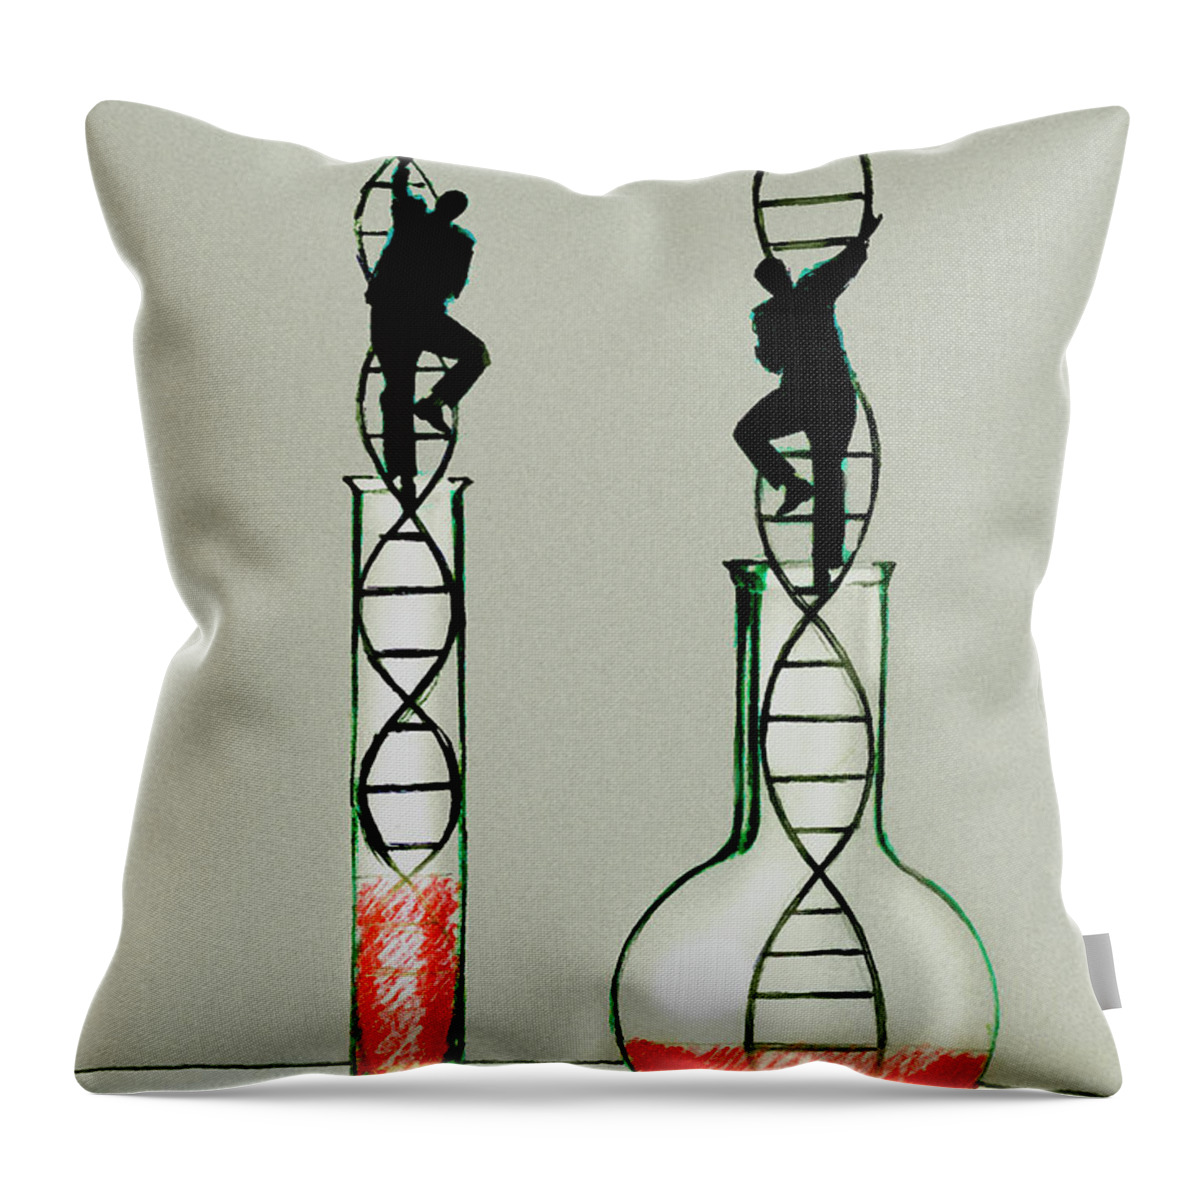 Adult Throw Pillow featuring the photograph Businessmen Climbing Double Helix by Ikon Ikon Images